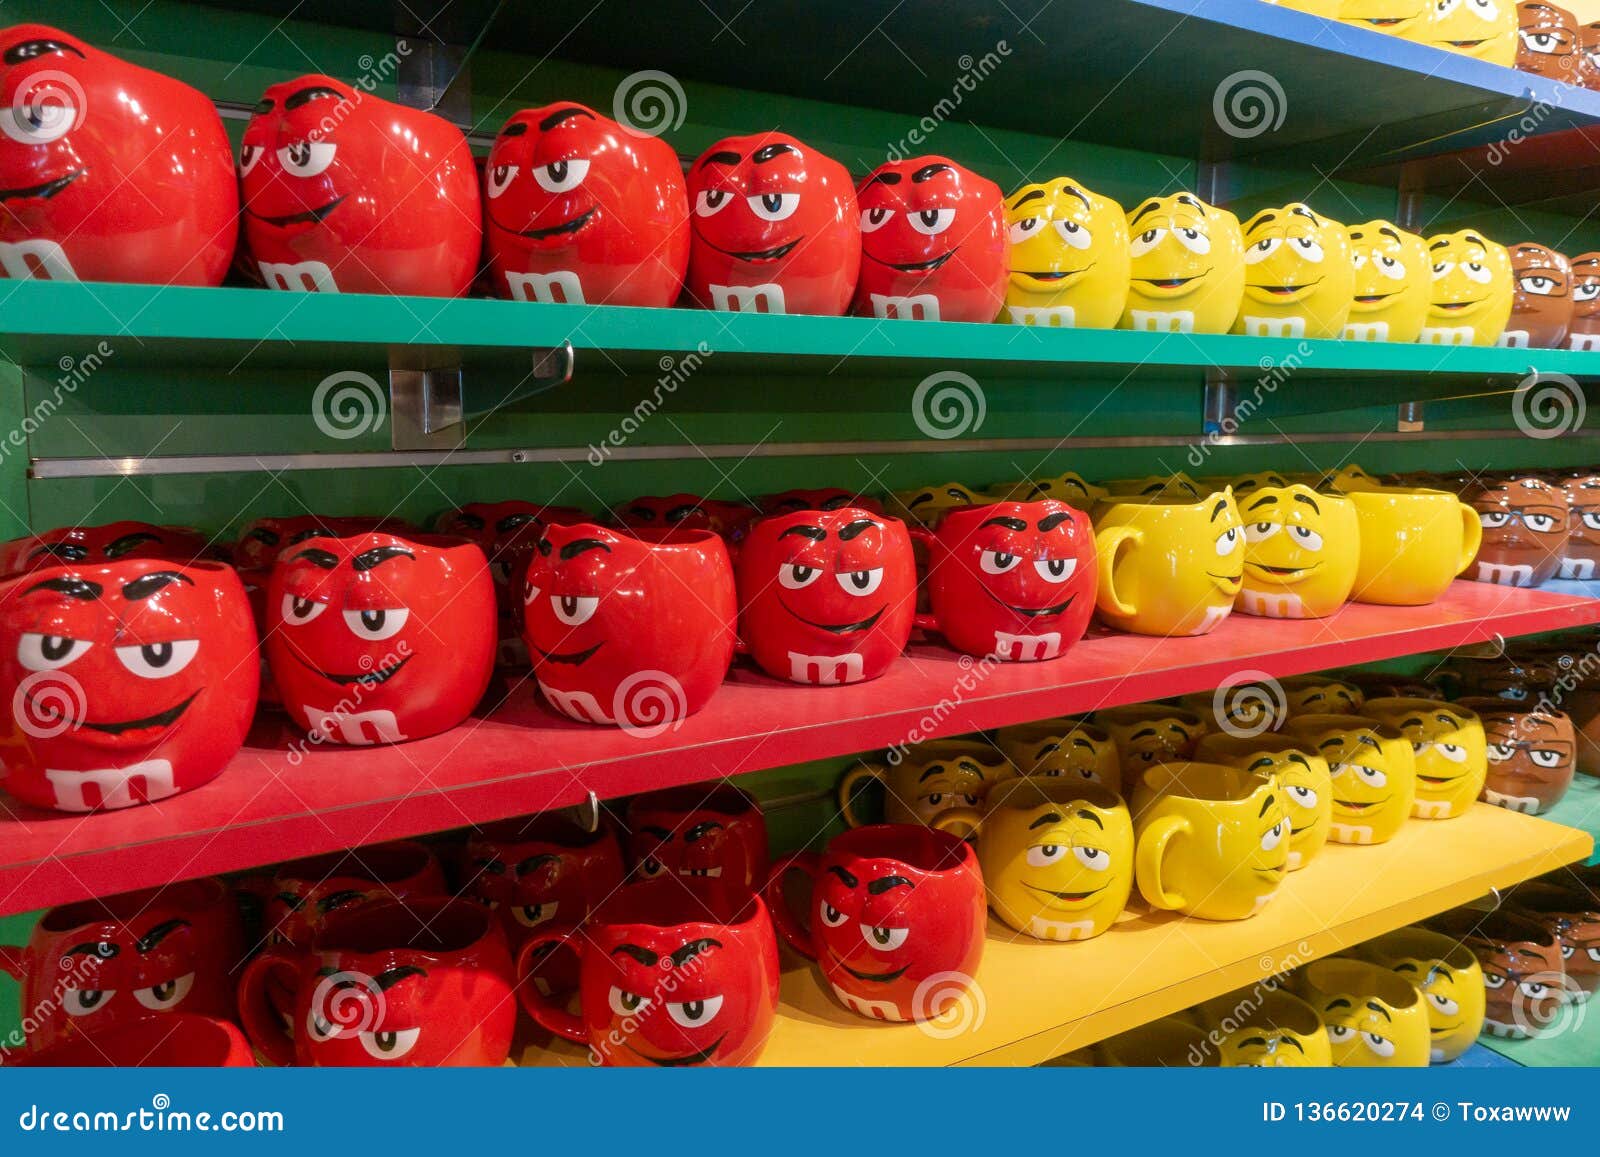 People Attend M M S World Candy Store At The Strip Editorial Stock Image Image Of Color Colorful